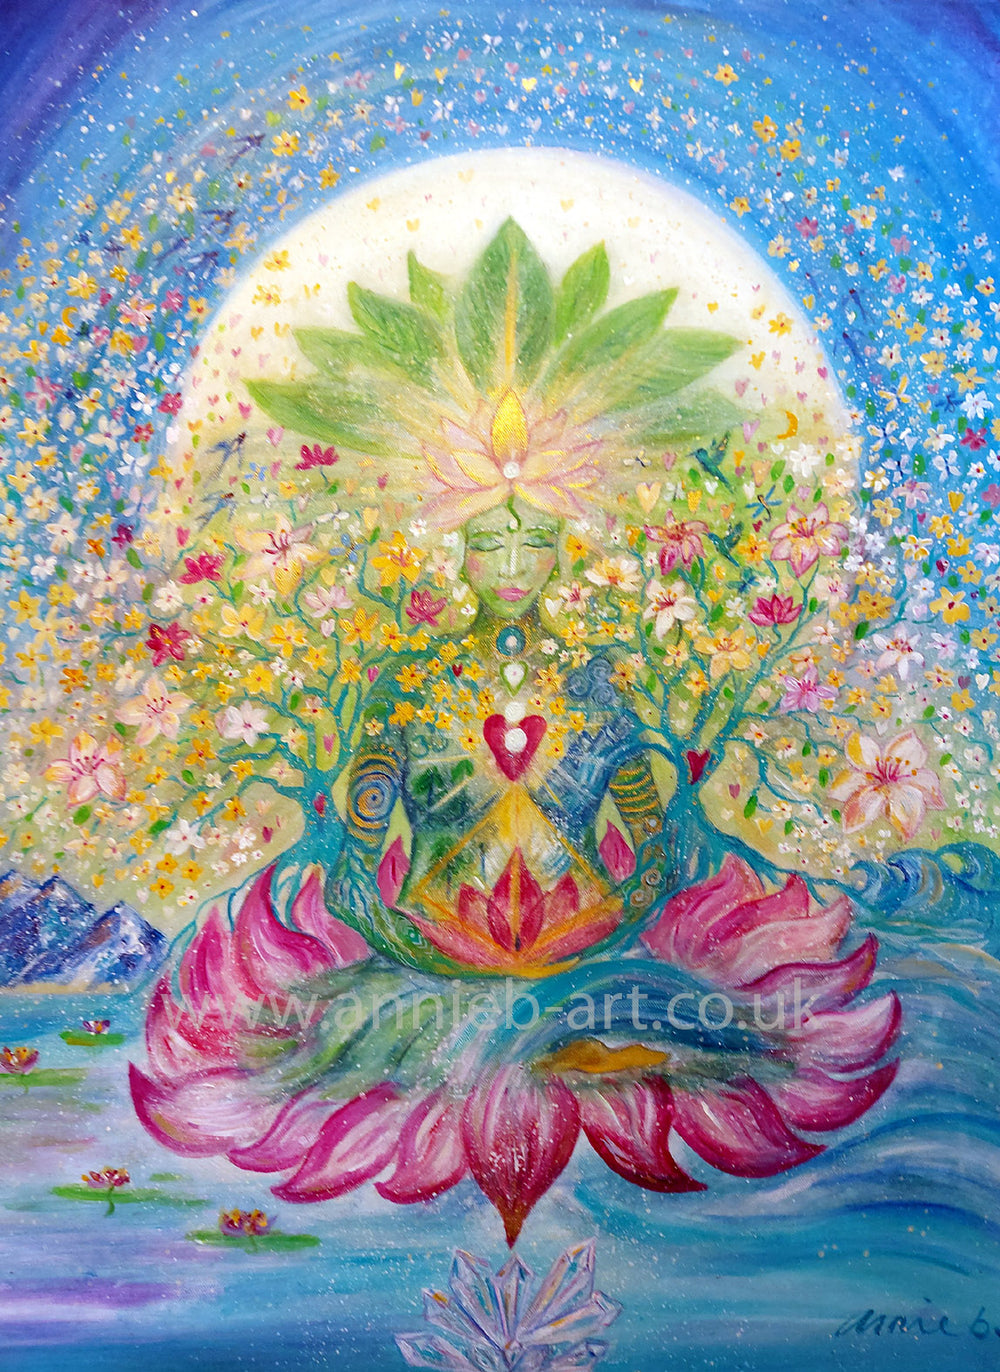 A fine art print of this beautiful Goddess of the earth.. Goddess Gaia.  This painting depicts the magic and wonder of  Goddess Gaia - Mother earth in her true Divine beauty.  The painting celebrates the love she shines, her bountiful abundance and deep nurturing energy.  goddess wise woman art